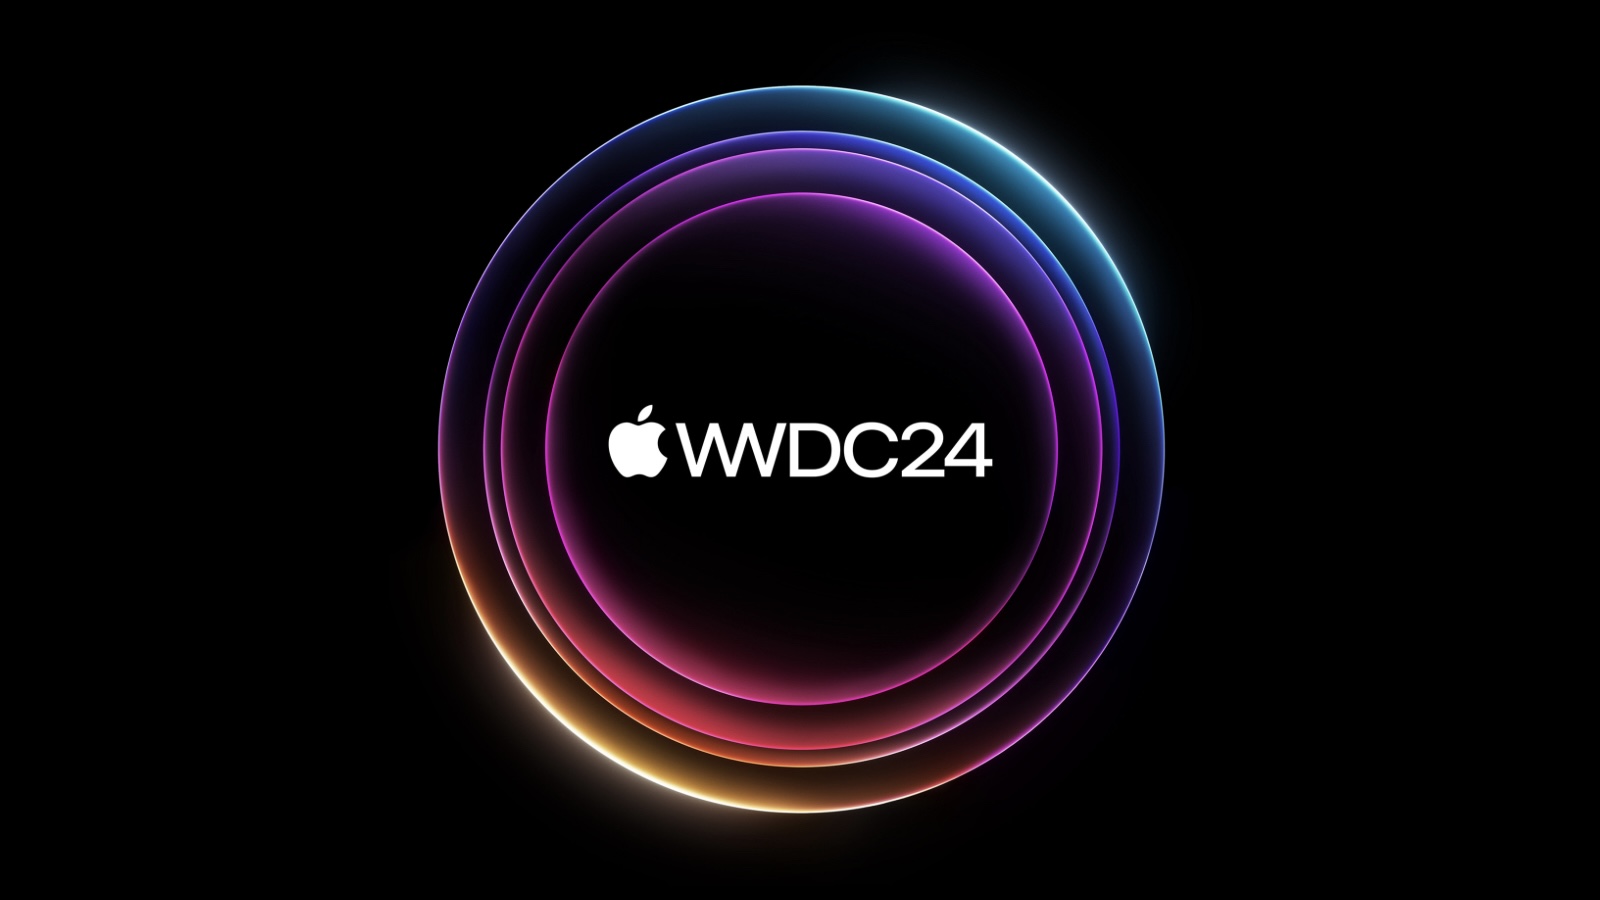 How to Watch Apple's WWDC 2024 Keynote on June 10 General Discussion